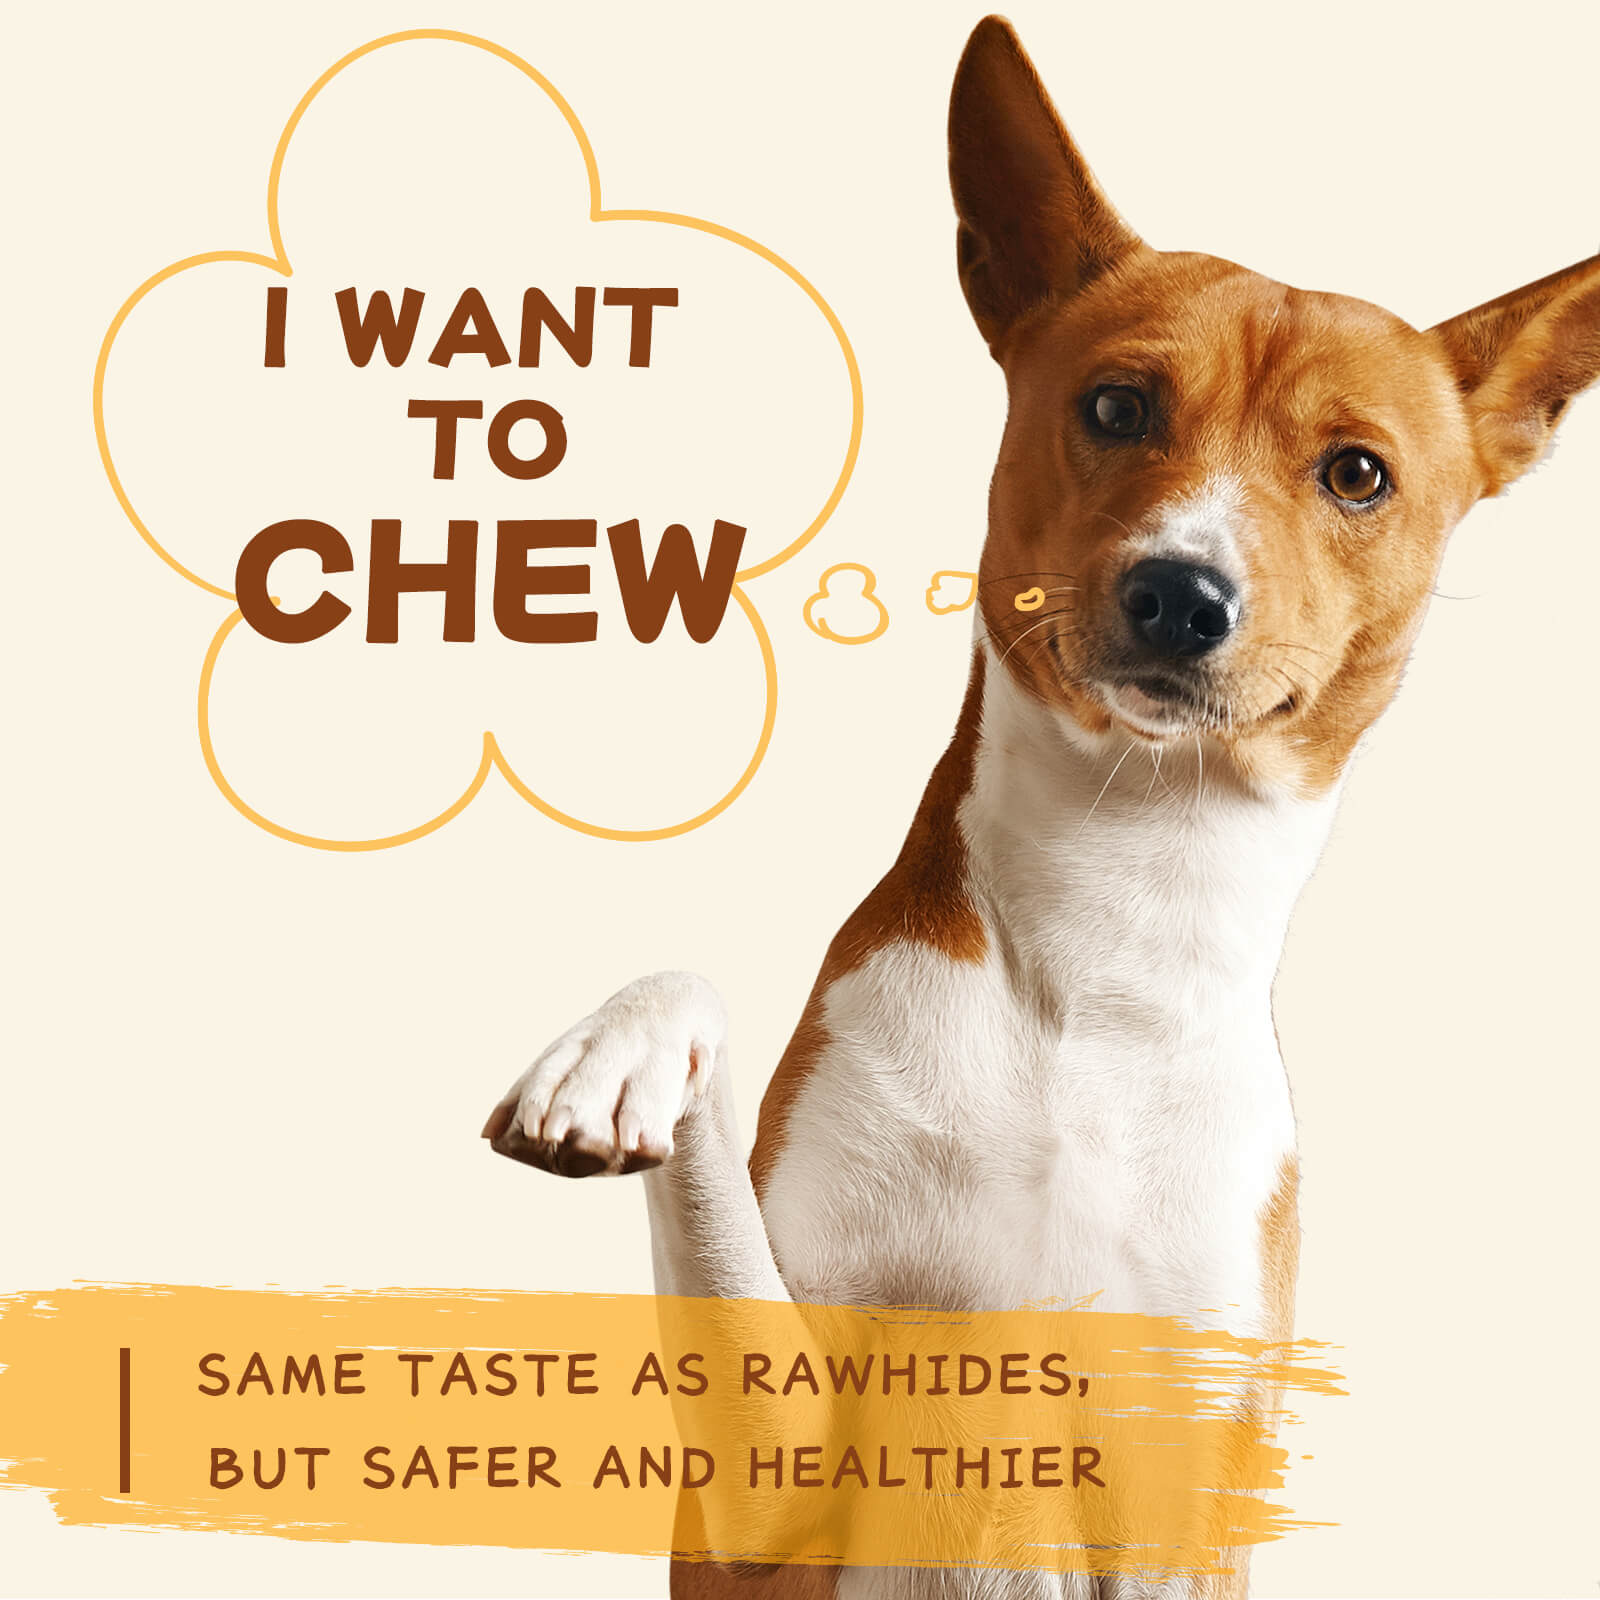 PAWUP Chicken Dog Chews for Small Dog,Rawhide Free,12.5 oz